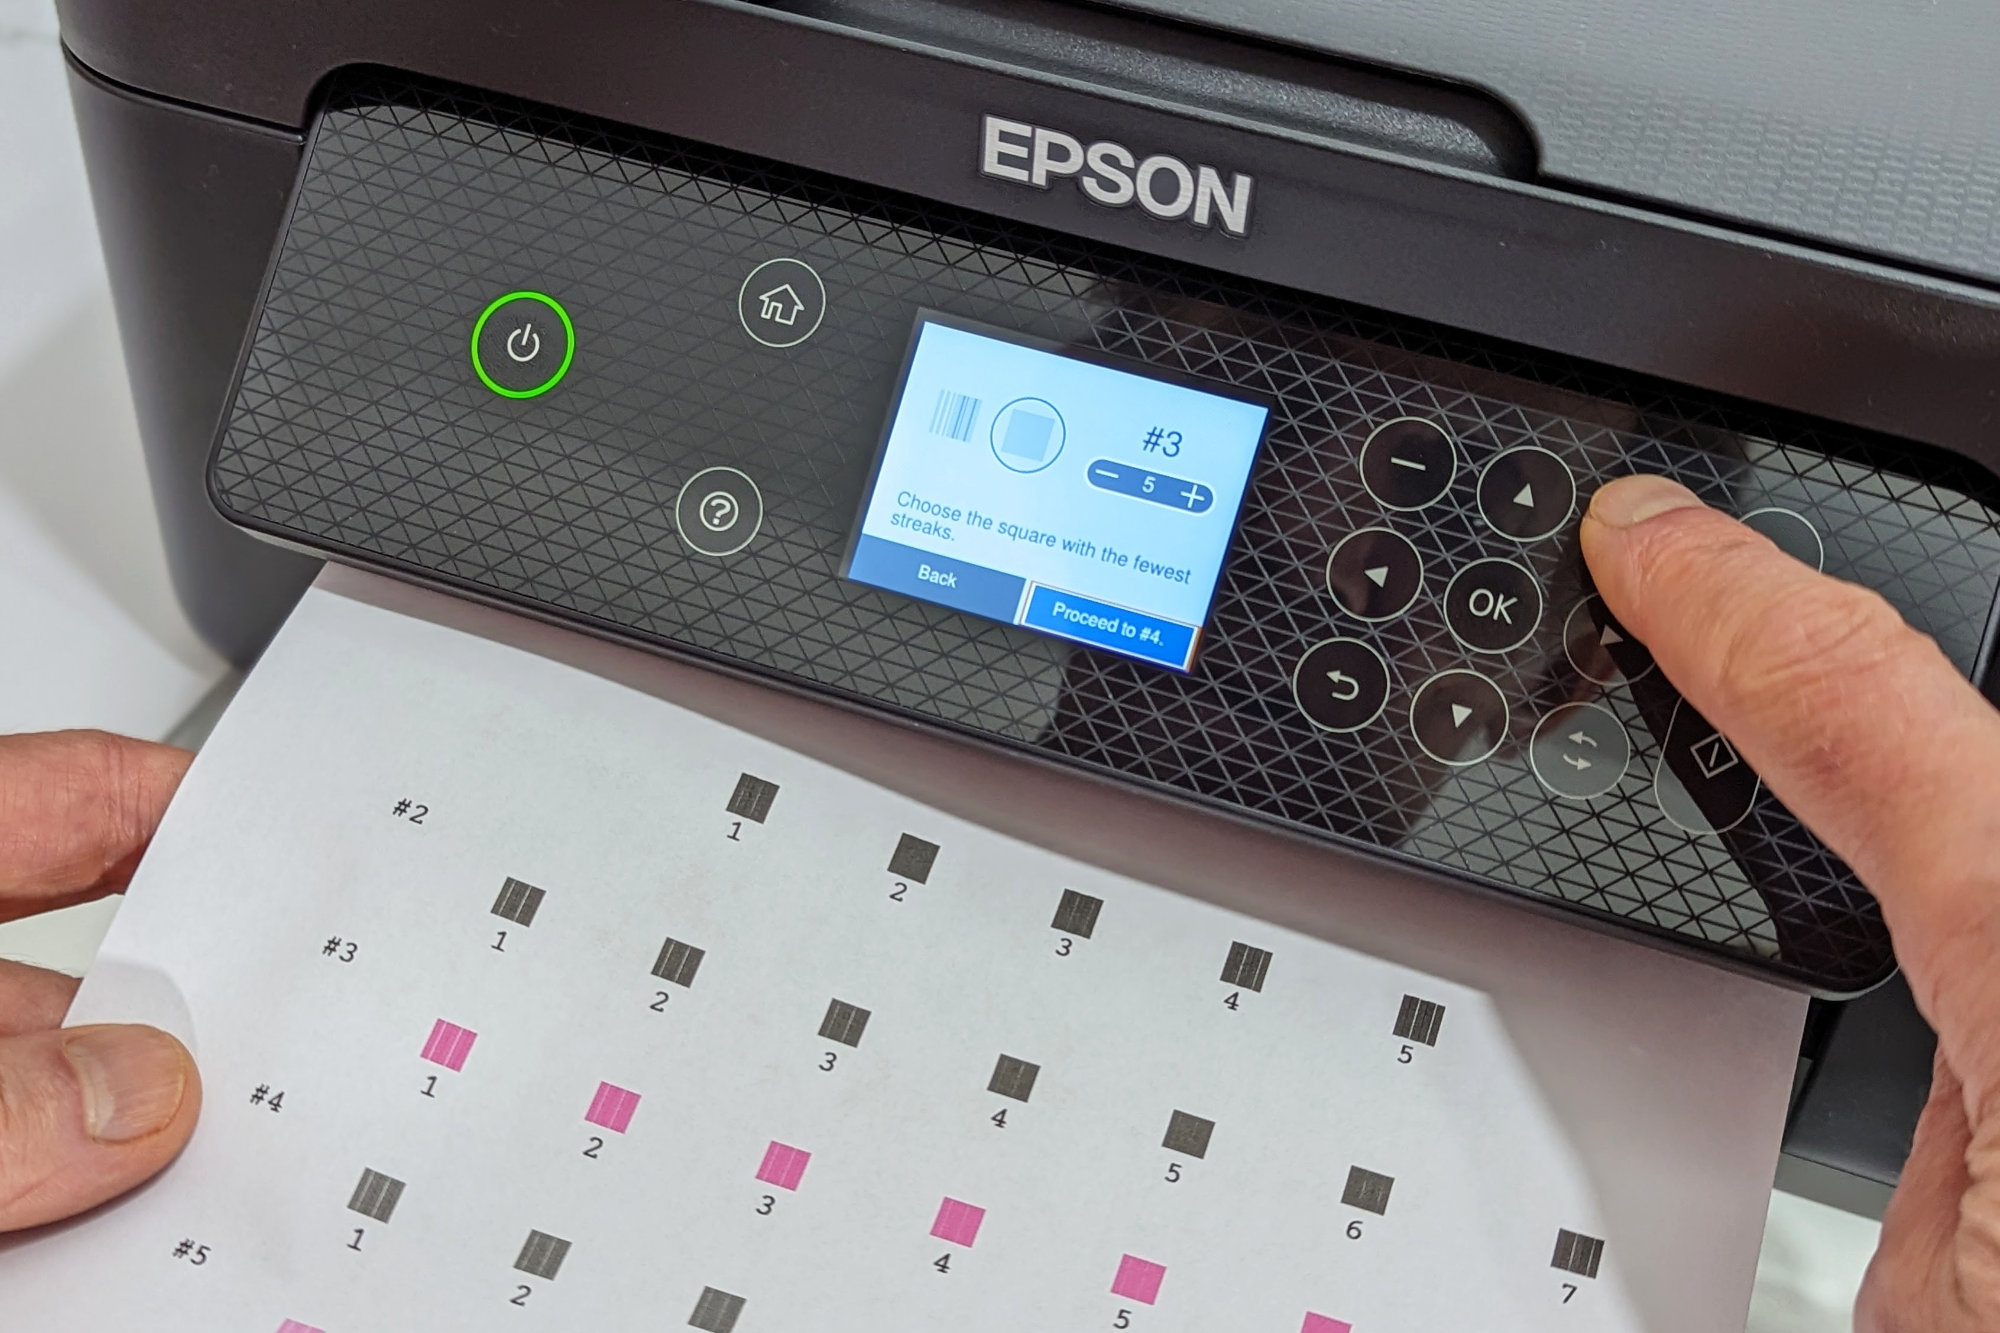 Epson Expression Home XP-4200 Wireless Color Inkjet All-in-One Printer with  Scan and Copy